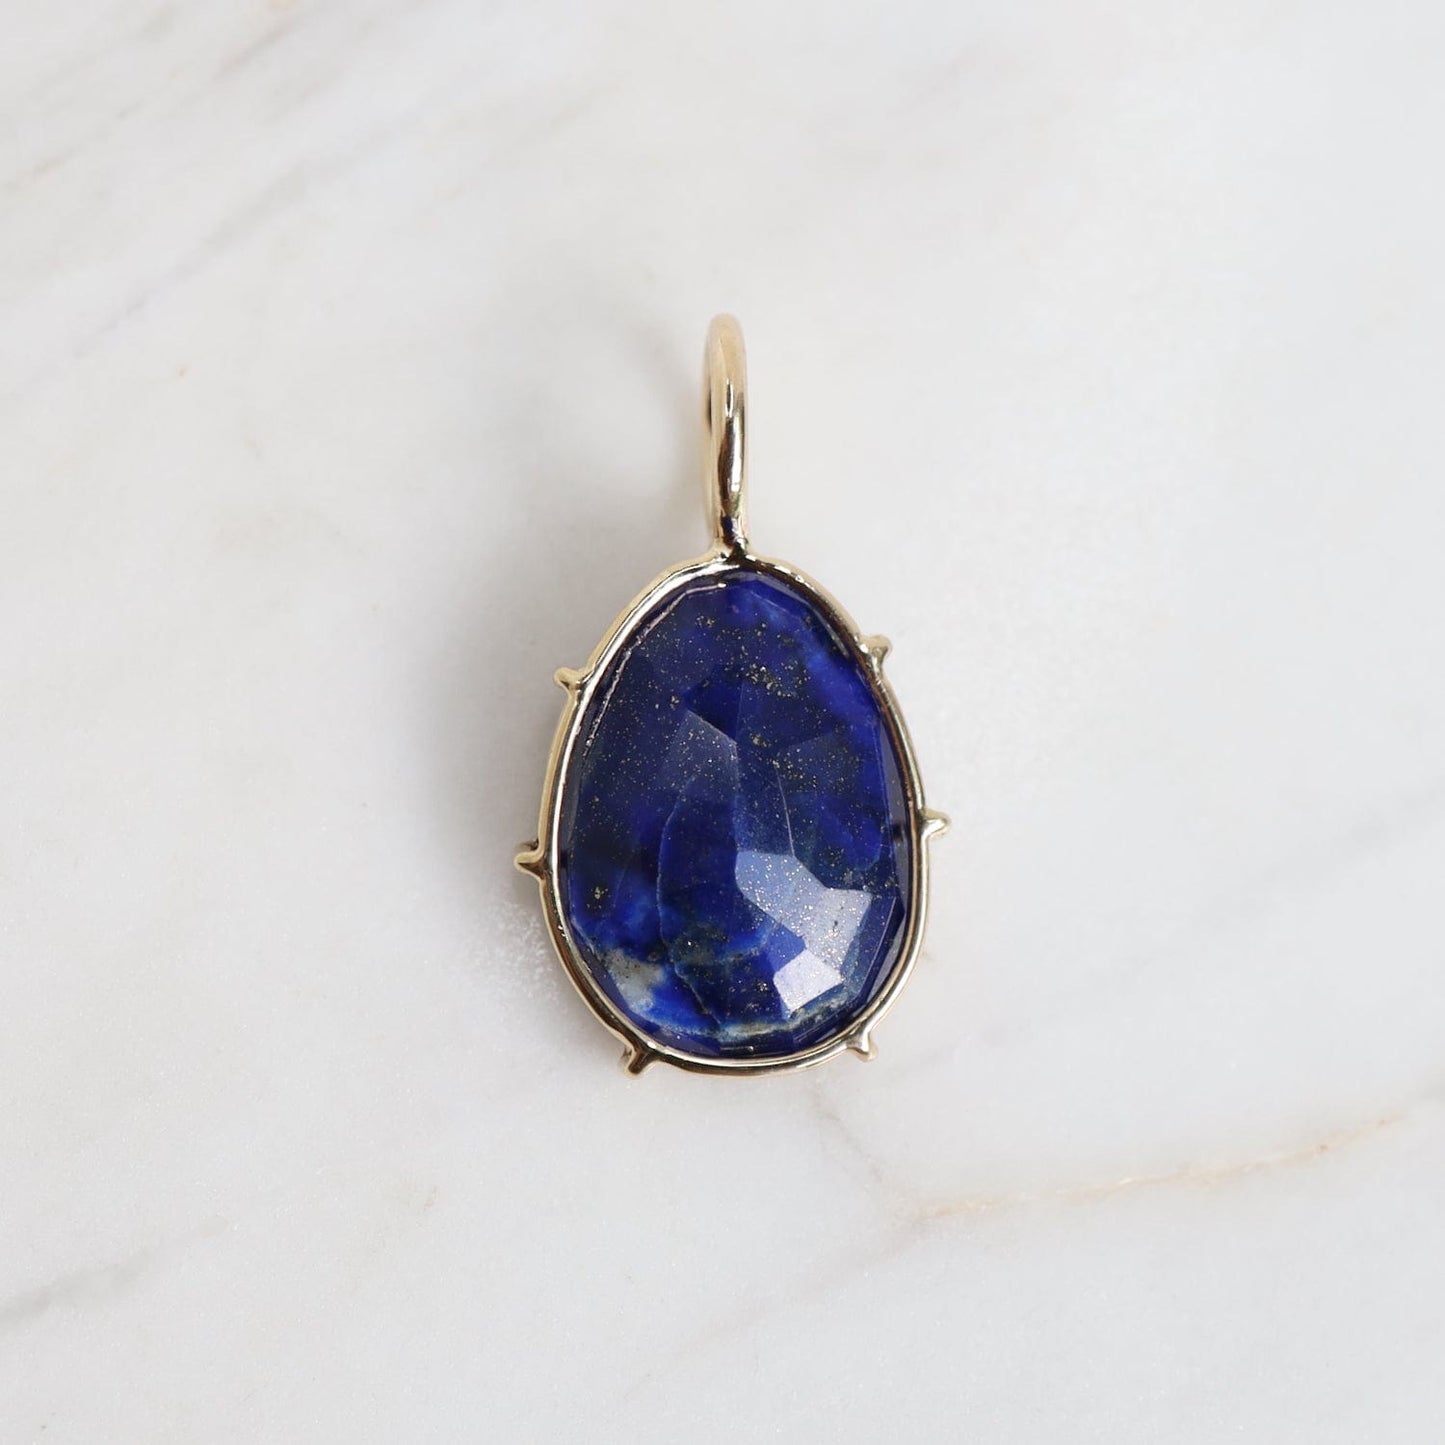 CHM One of a Kind Lapis Harriet Stone Charm